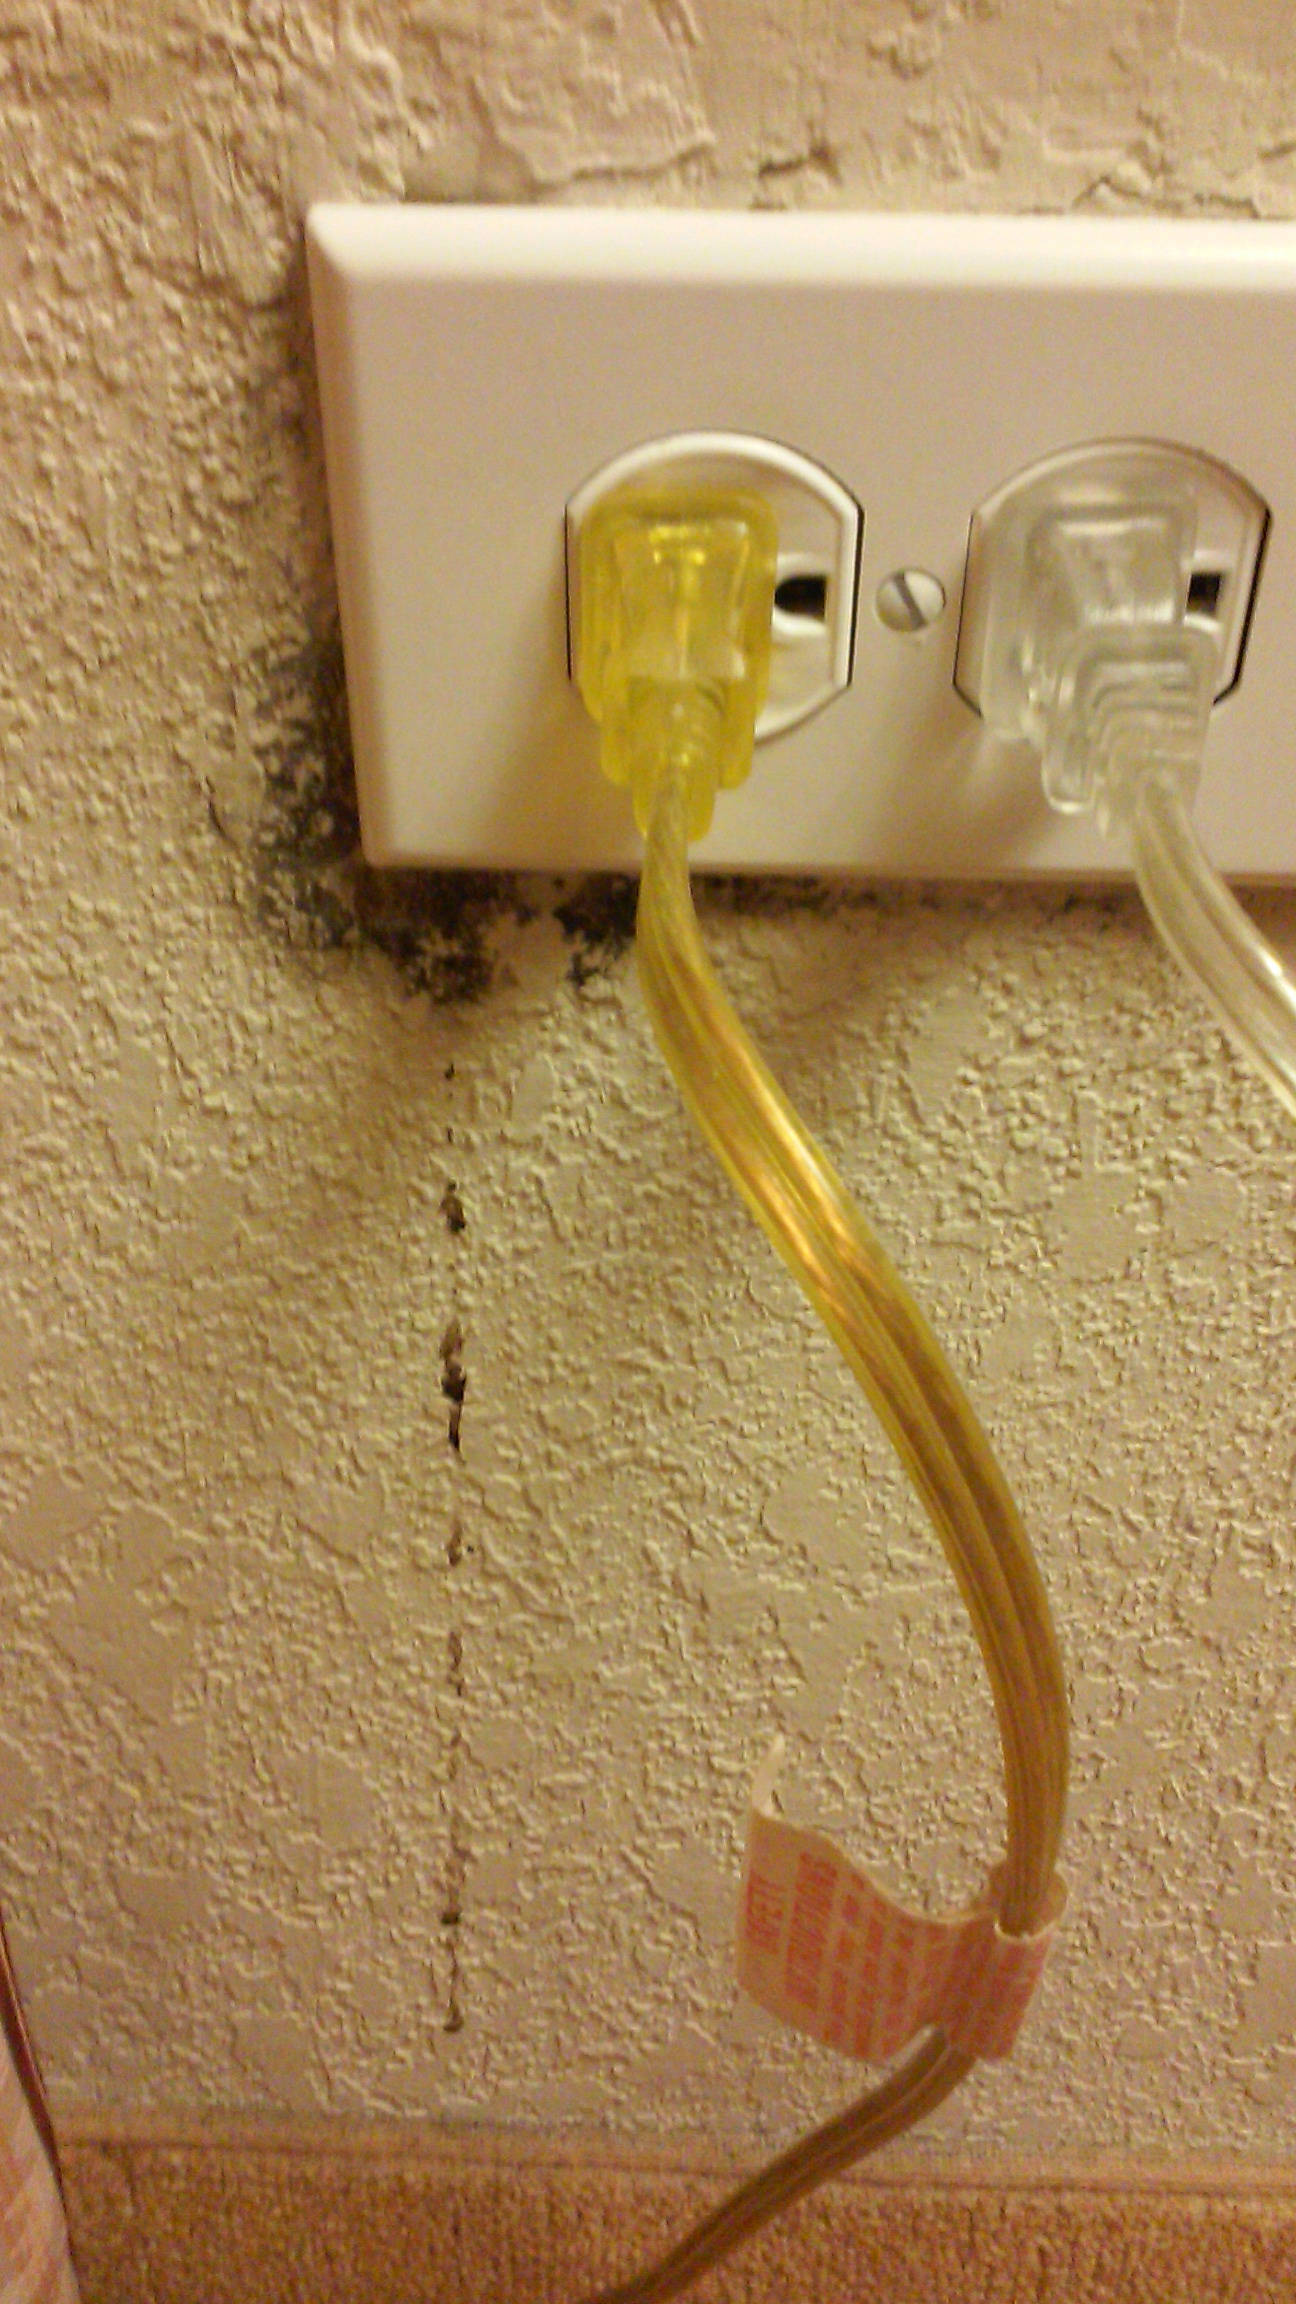 A Small Electrical Problem